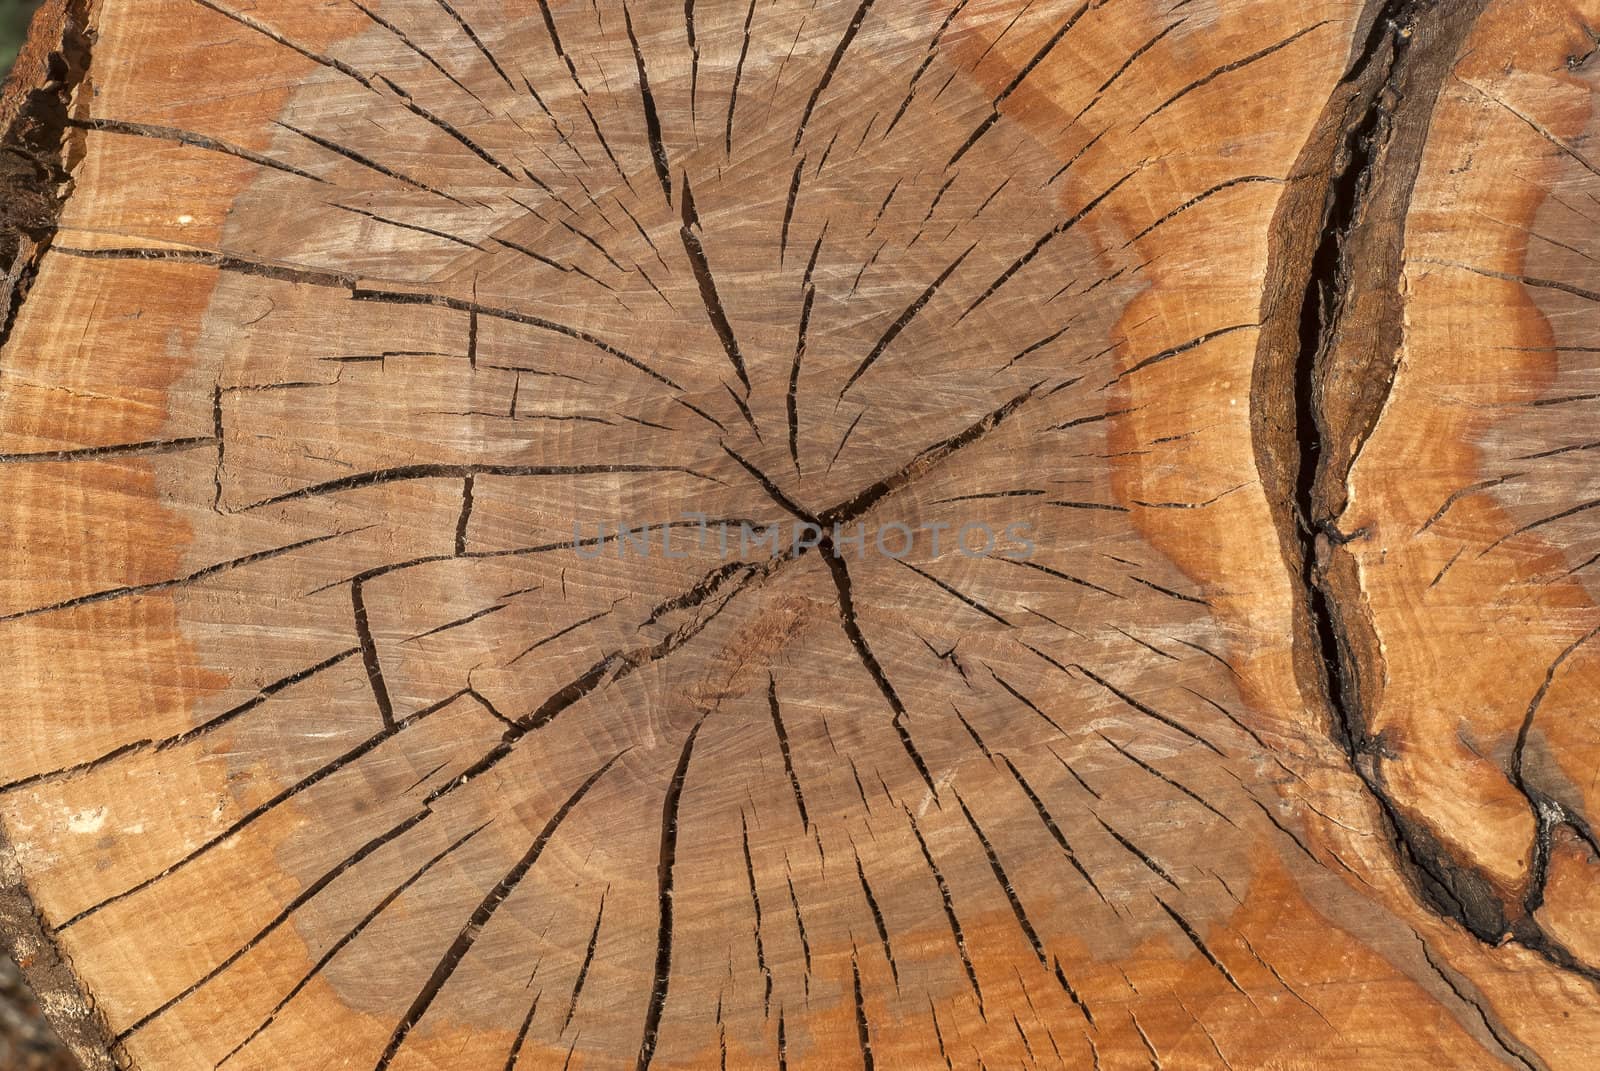 Oak log surface with cracks as background